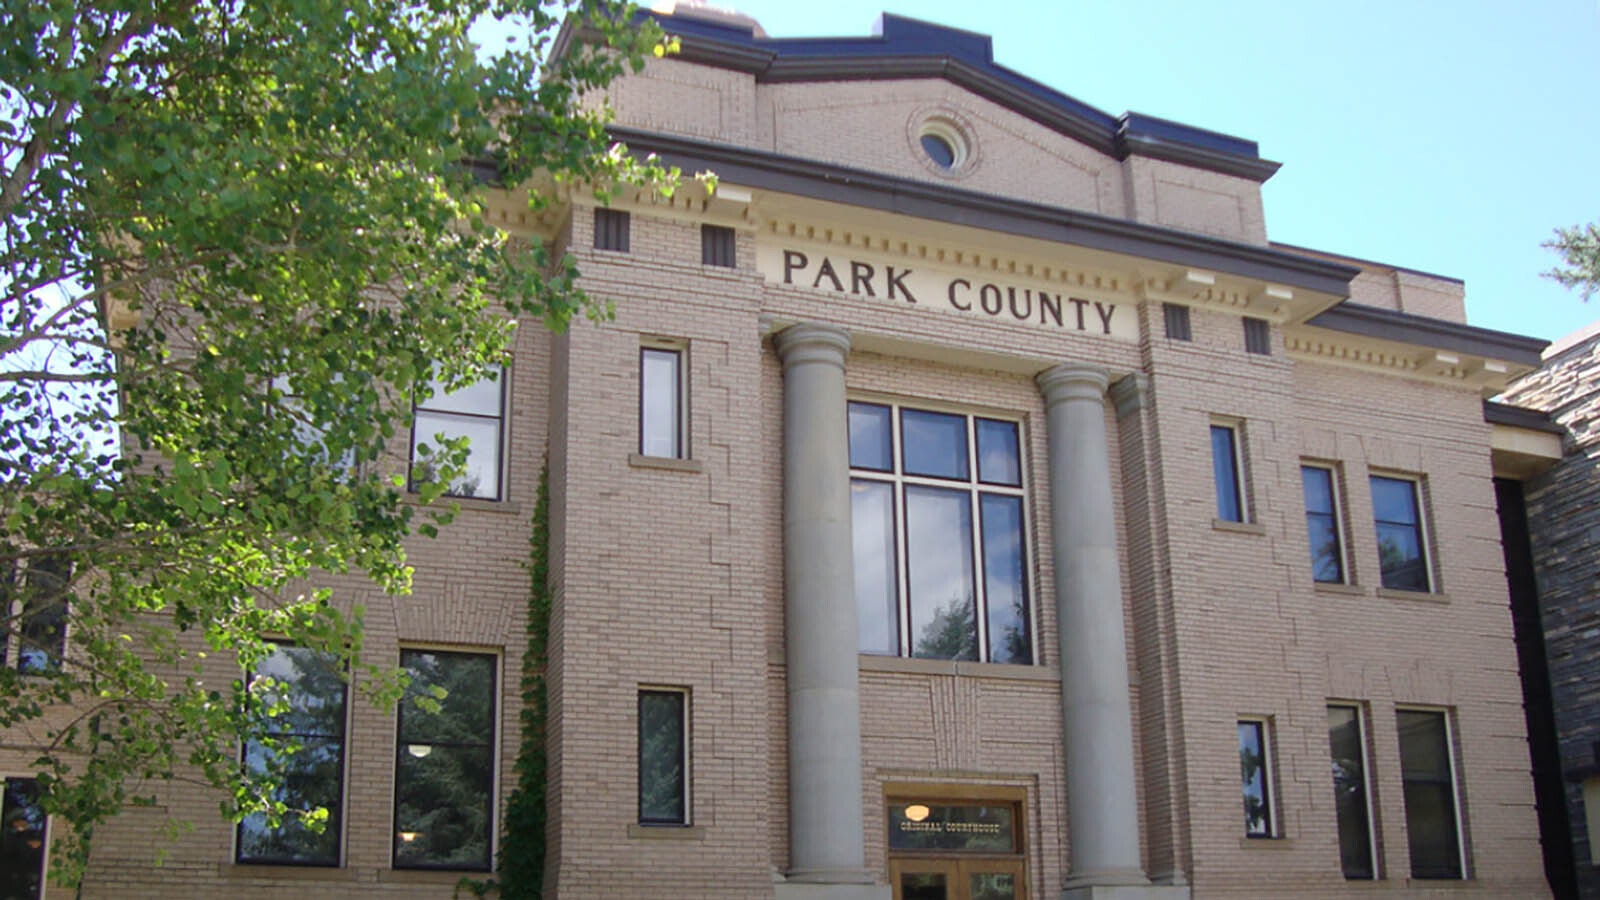 Park County courthouse